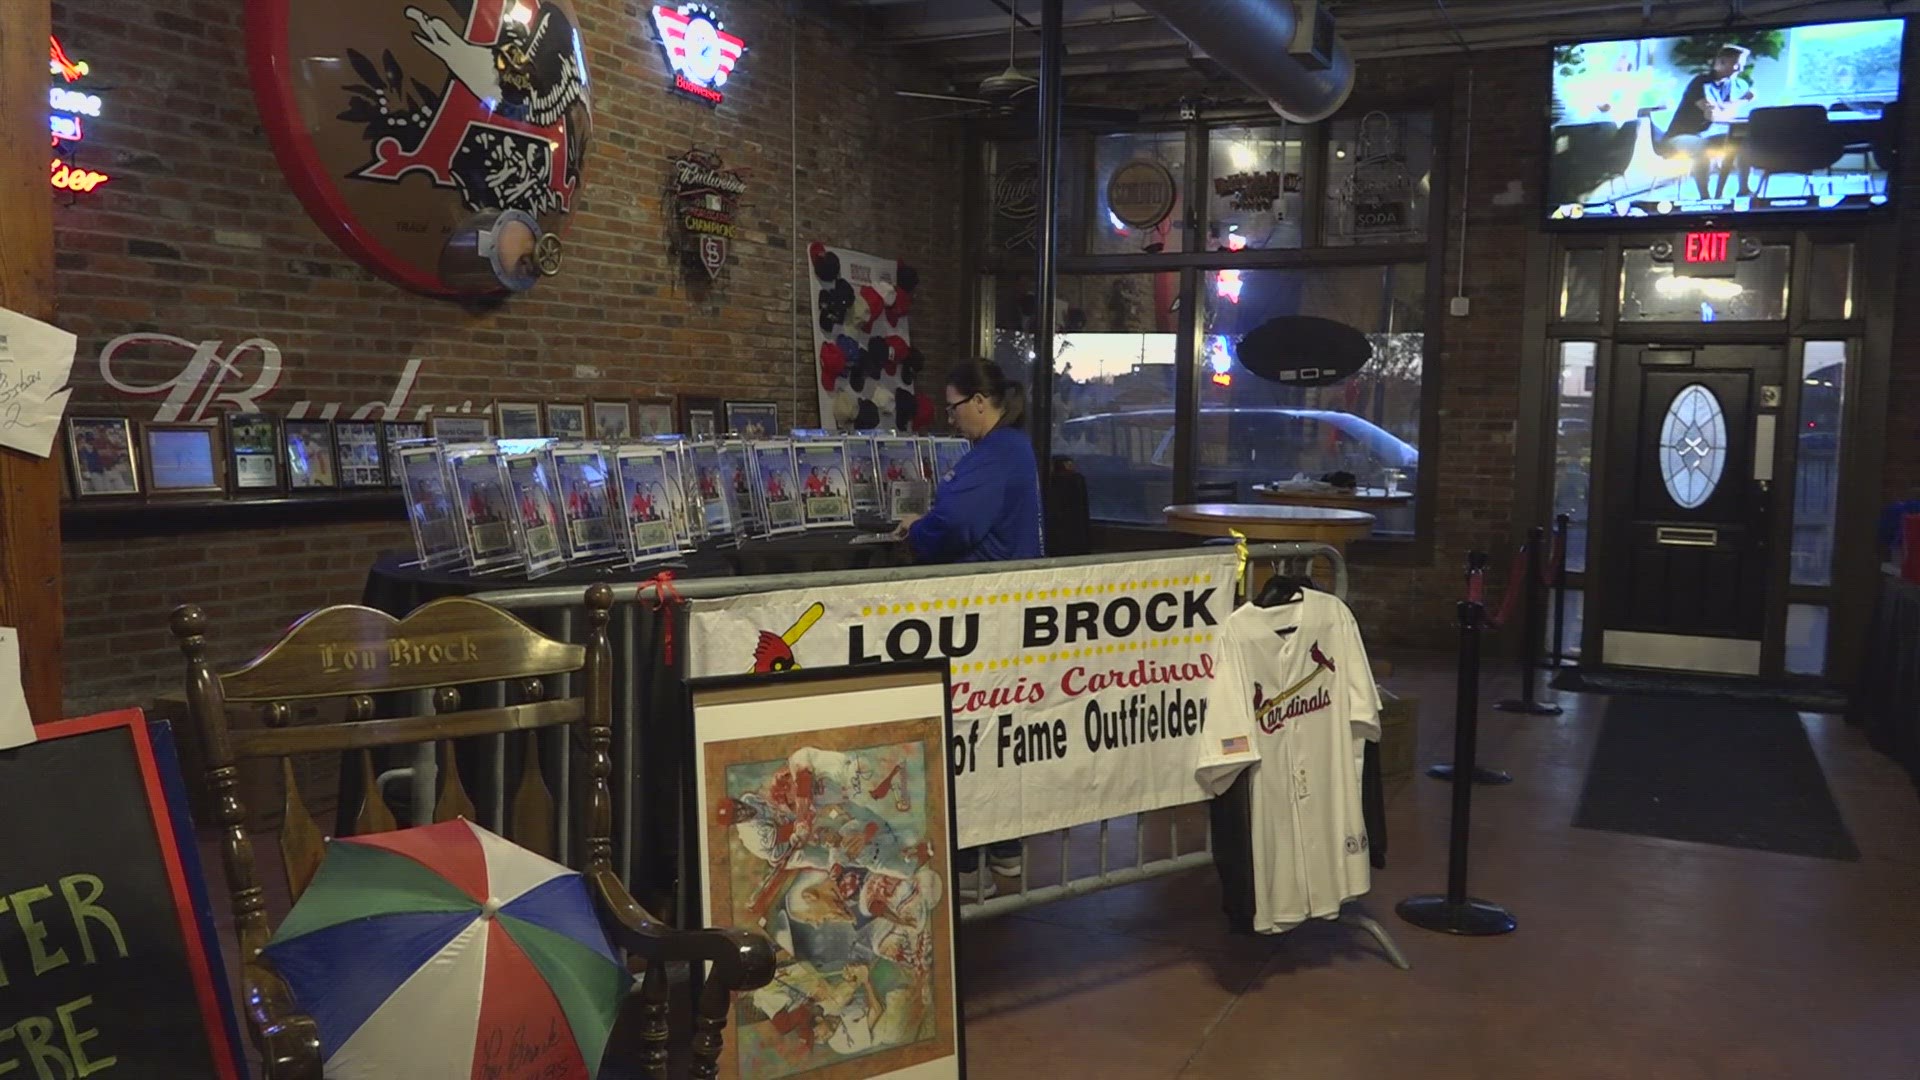 It's a rare opportunity for Cardinals fans. Thousands of items from Lou Brock's personal collection are up for sale.